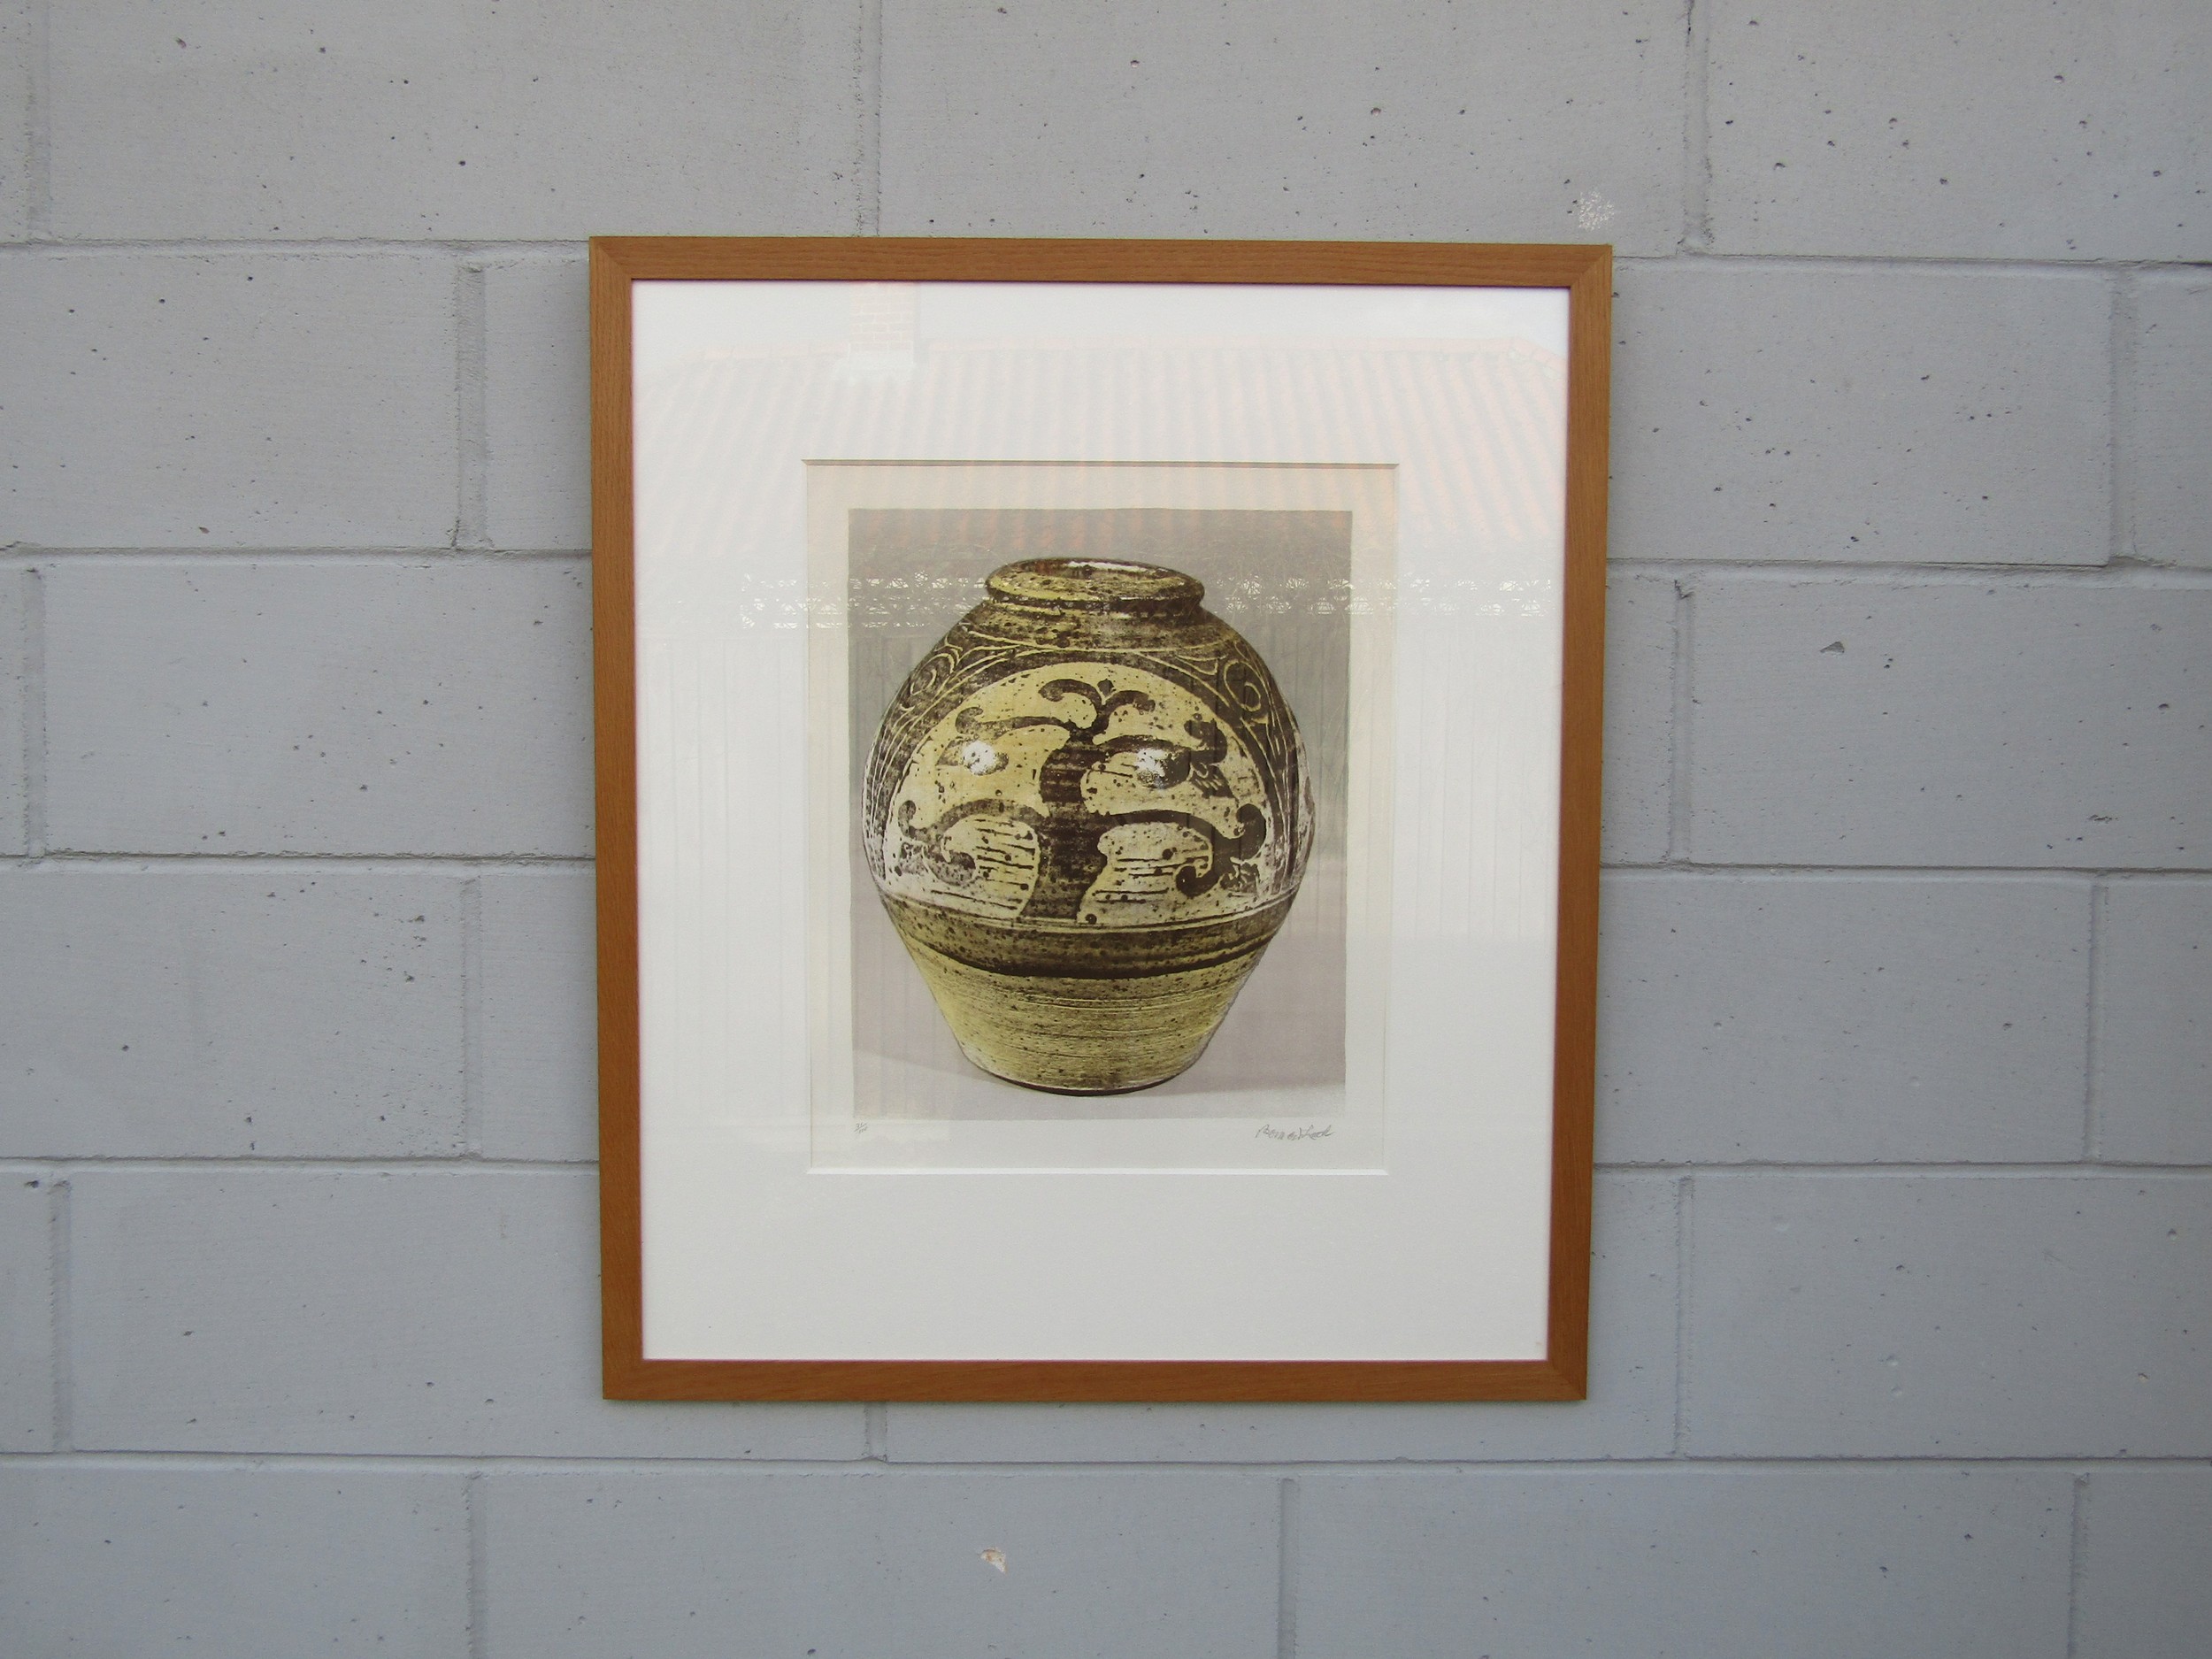 BERNARD LEACH (1887-1979) A framed and glazed lithograph from 1974, 'Tree Jar'. Signed in pencil